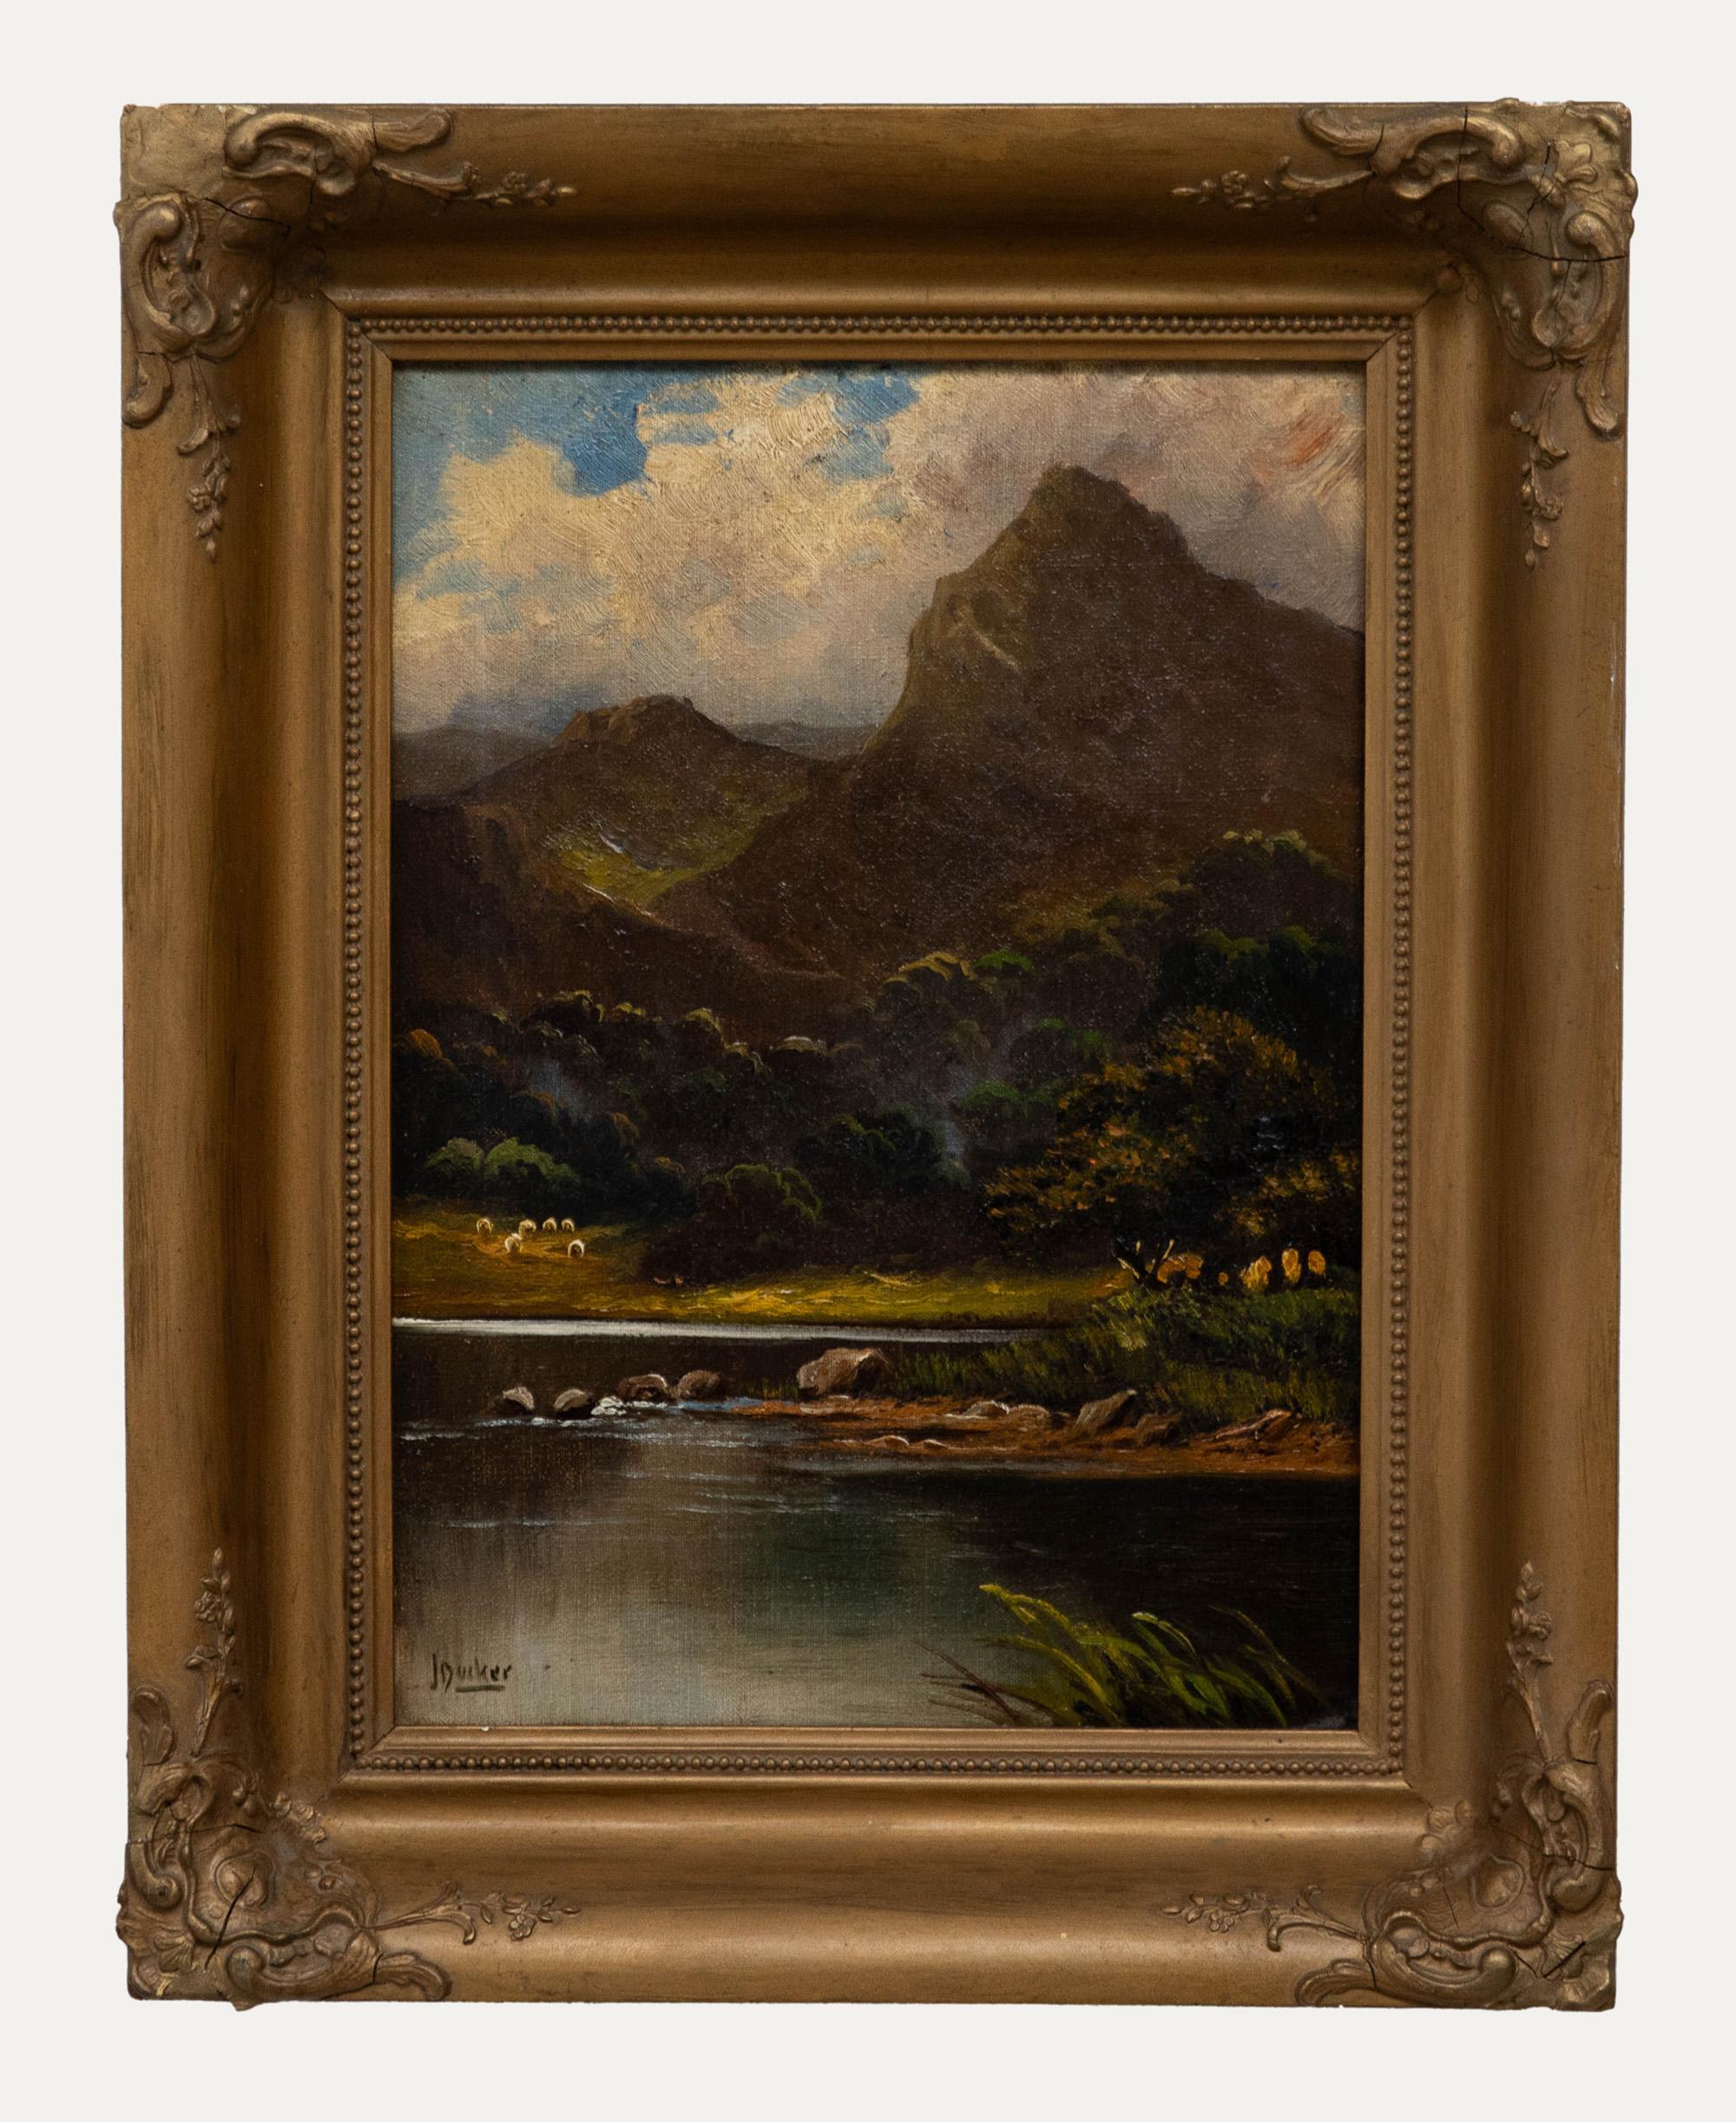 Unknown Landscape Painting - Jack M. Ducker (fl. 1910-1930) - Framed Oil, Lakeside Mountains